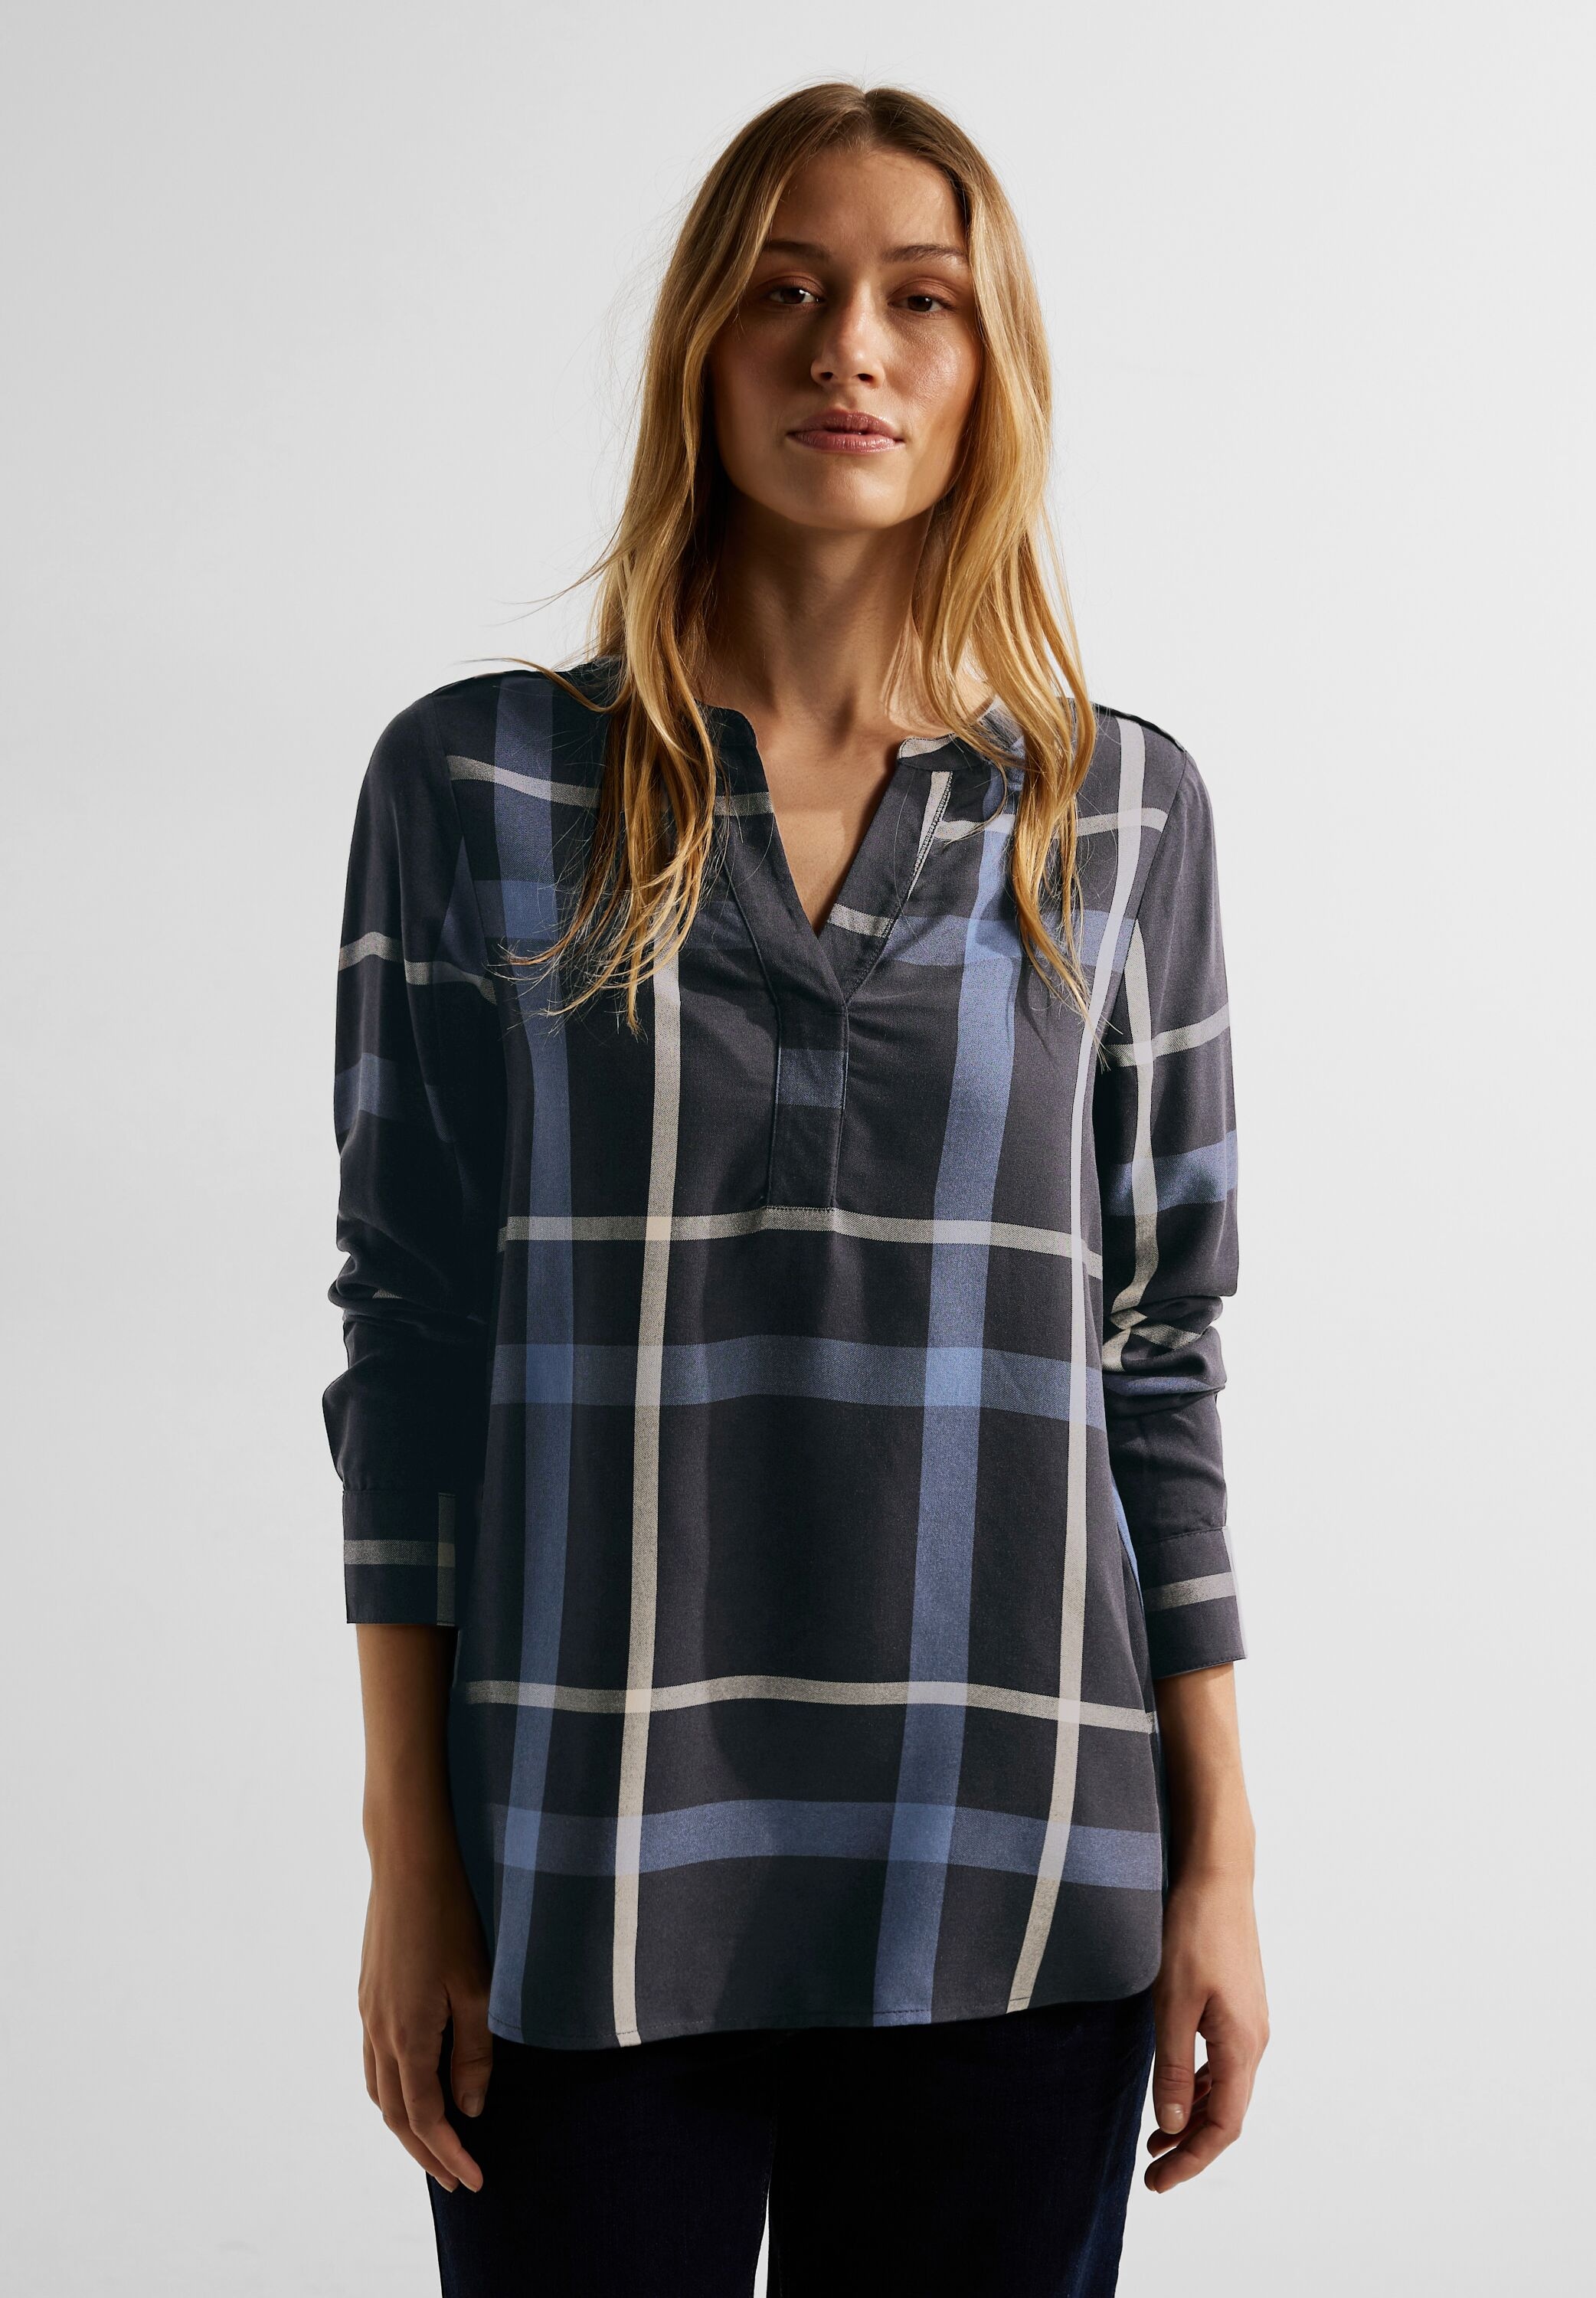 Cecil Longbluse »Check Long Blouse«, Karo-Druck bei OTTOversand